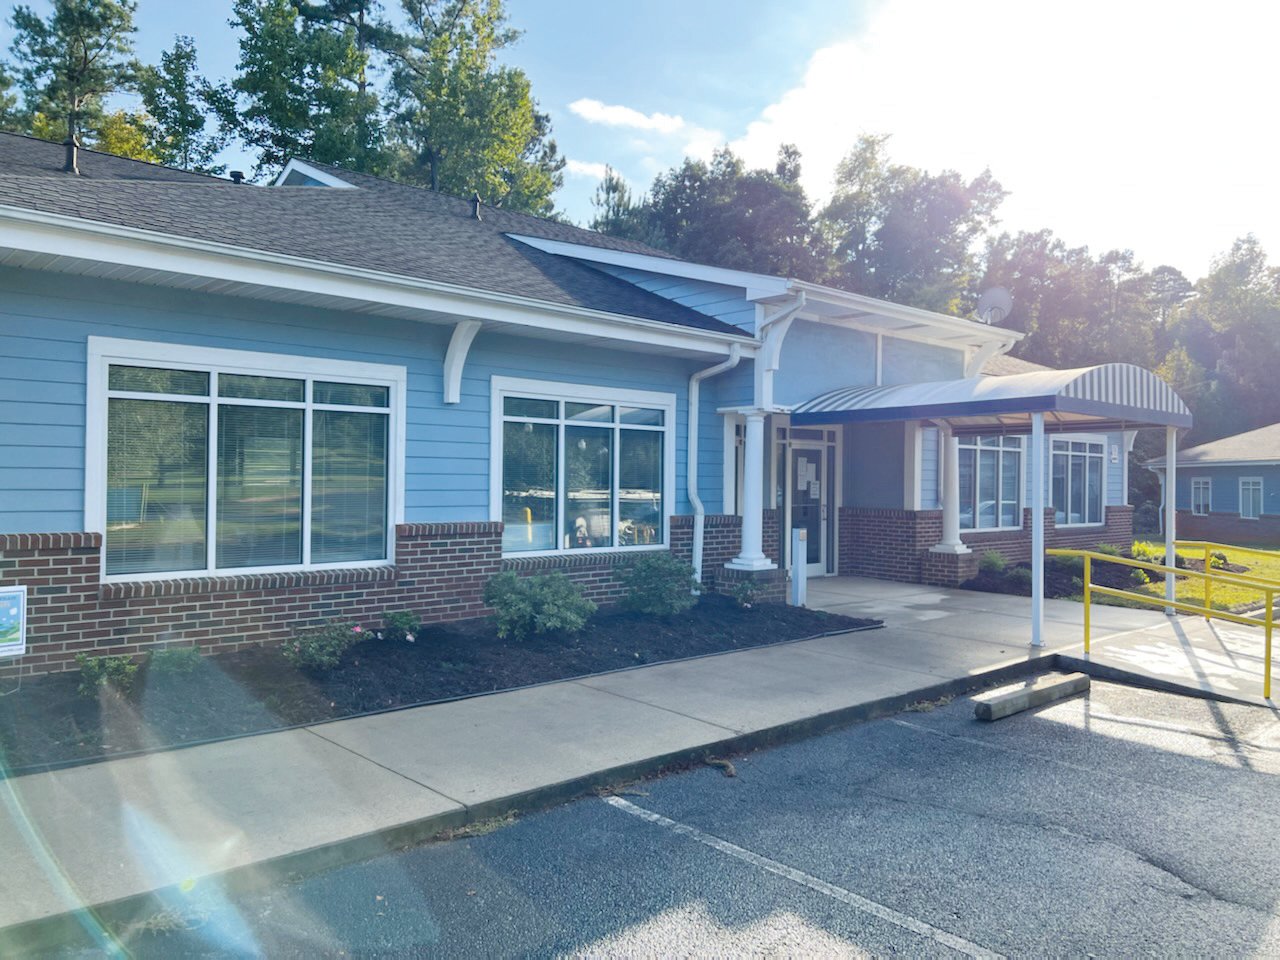 A crew of more than 25 employees of area Lowe’s Home Improvement stores worked to beautify the Council on Aging's center in Siler City recently..